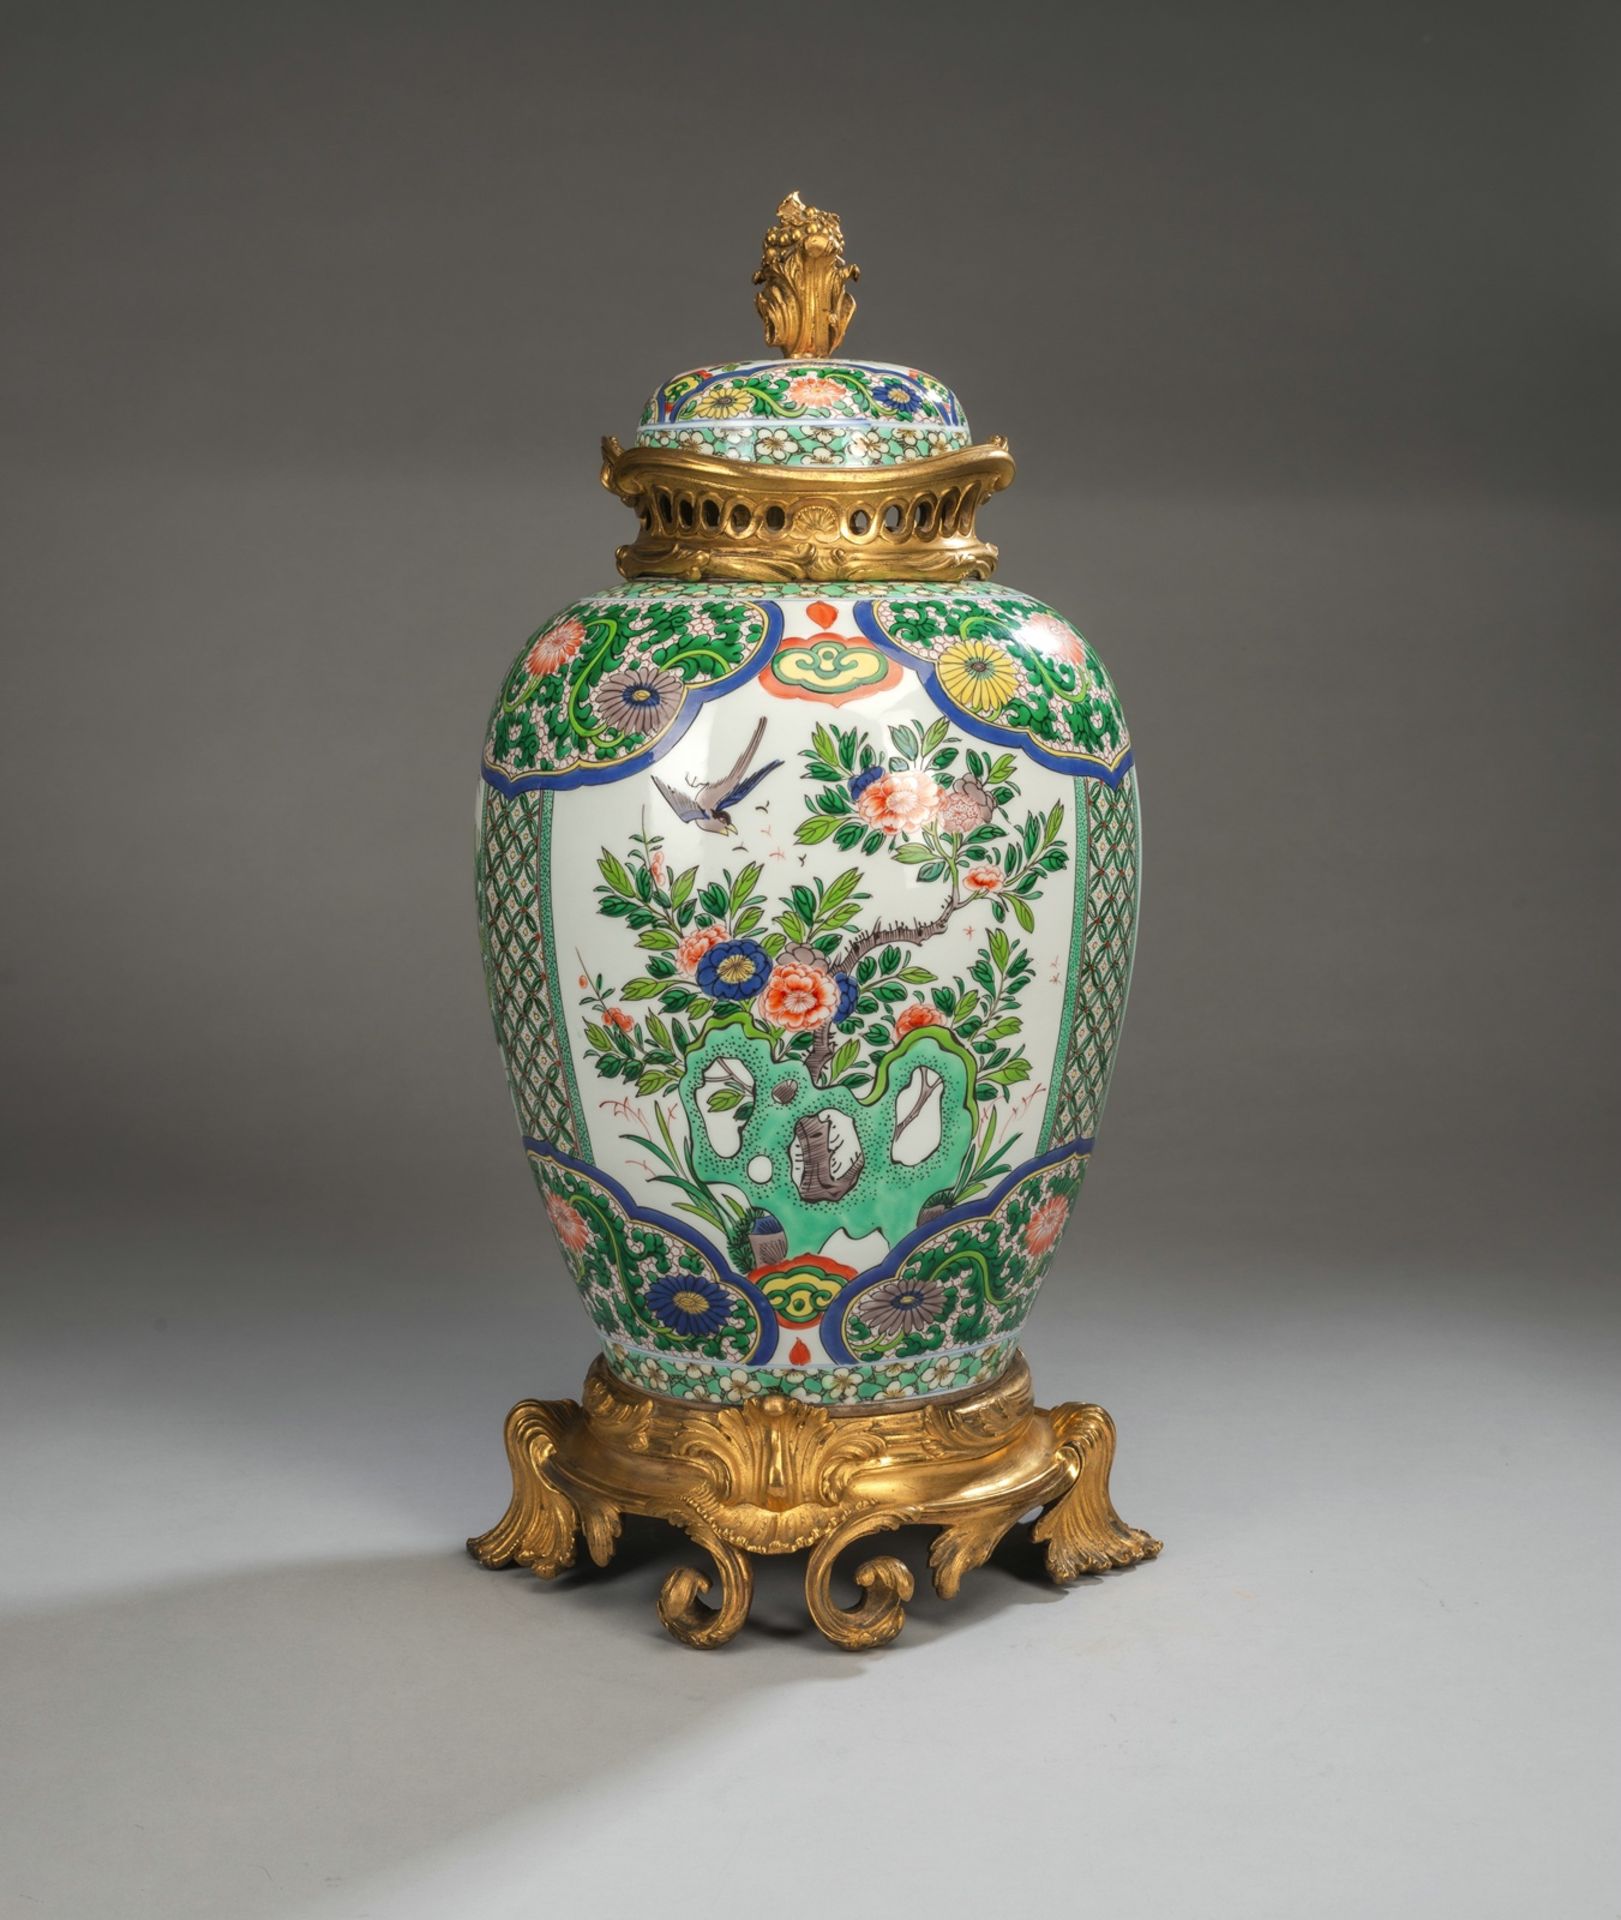 A LARGE CHINOISERIE STYLE ORMOLU MOUNTED PORCELAIN VASE AND COVER - Image 2 of 4